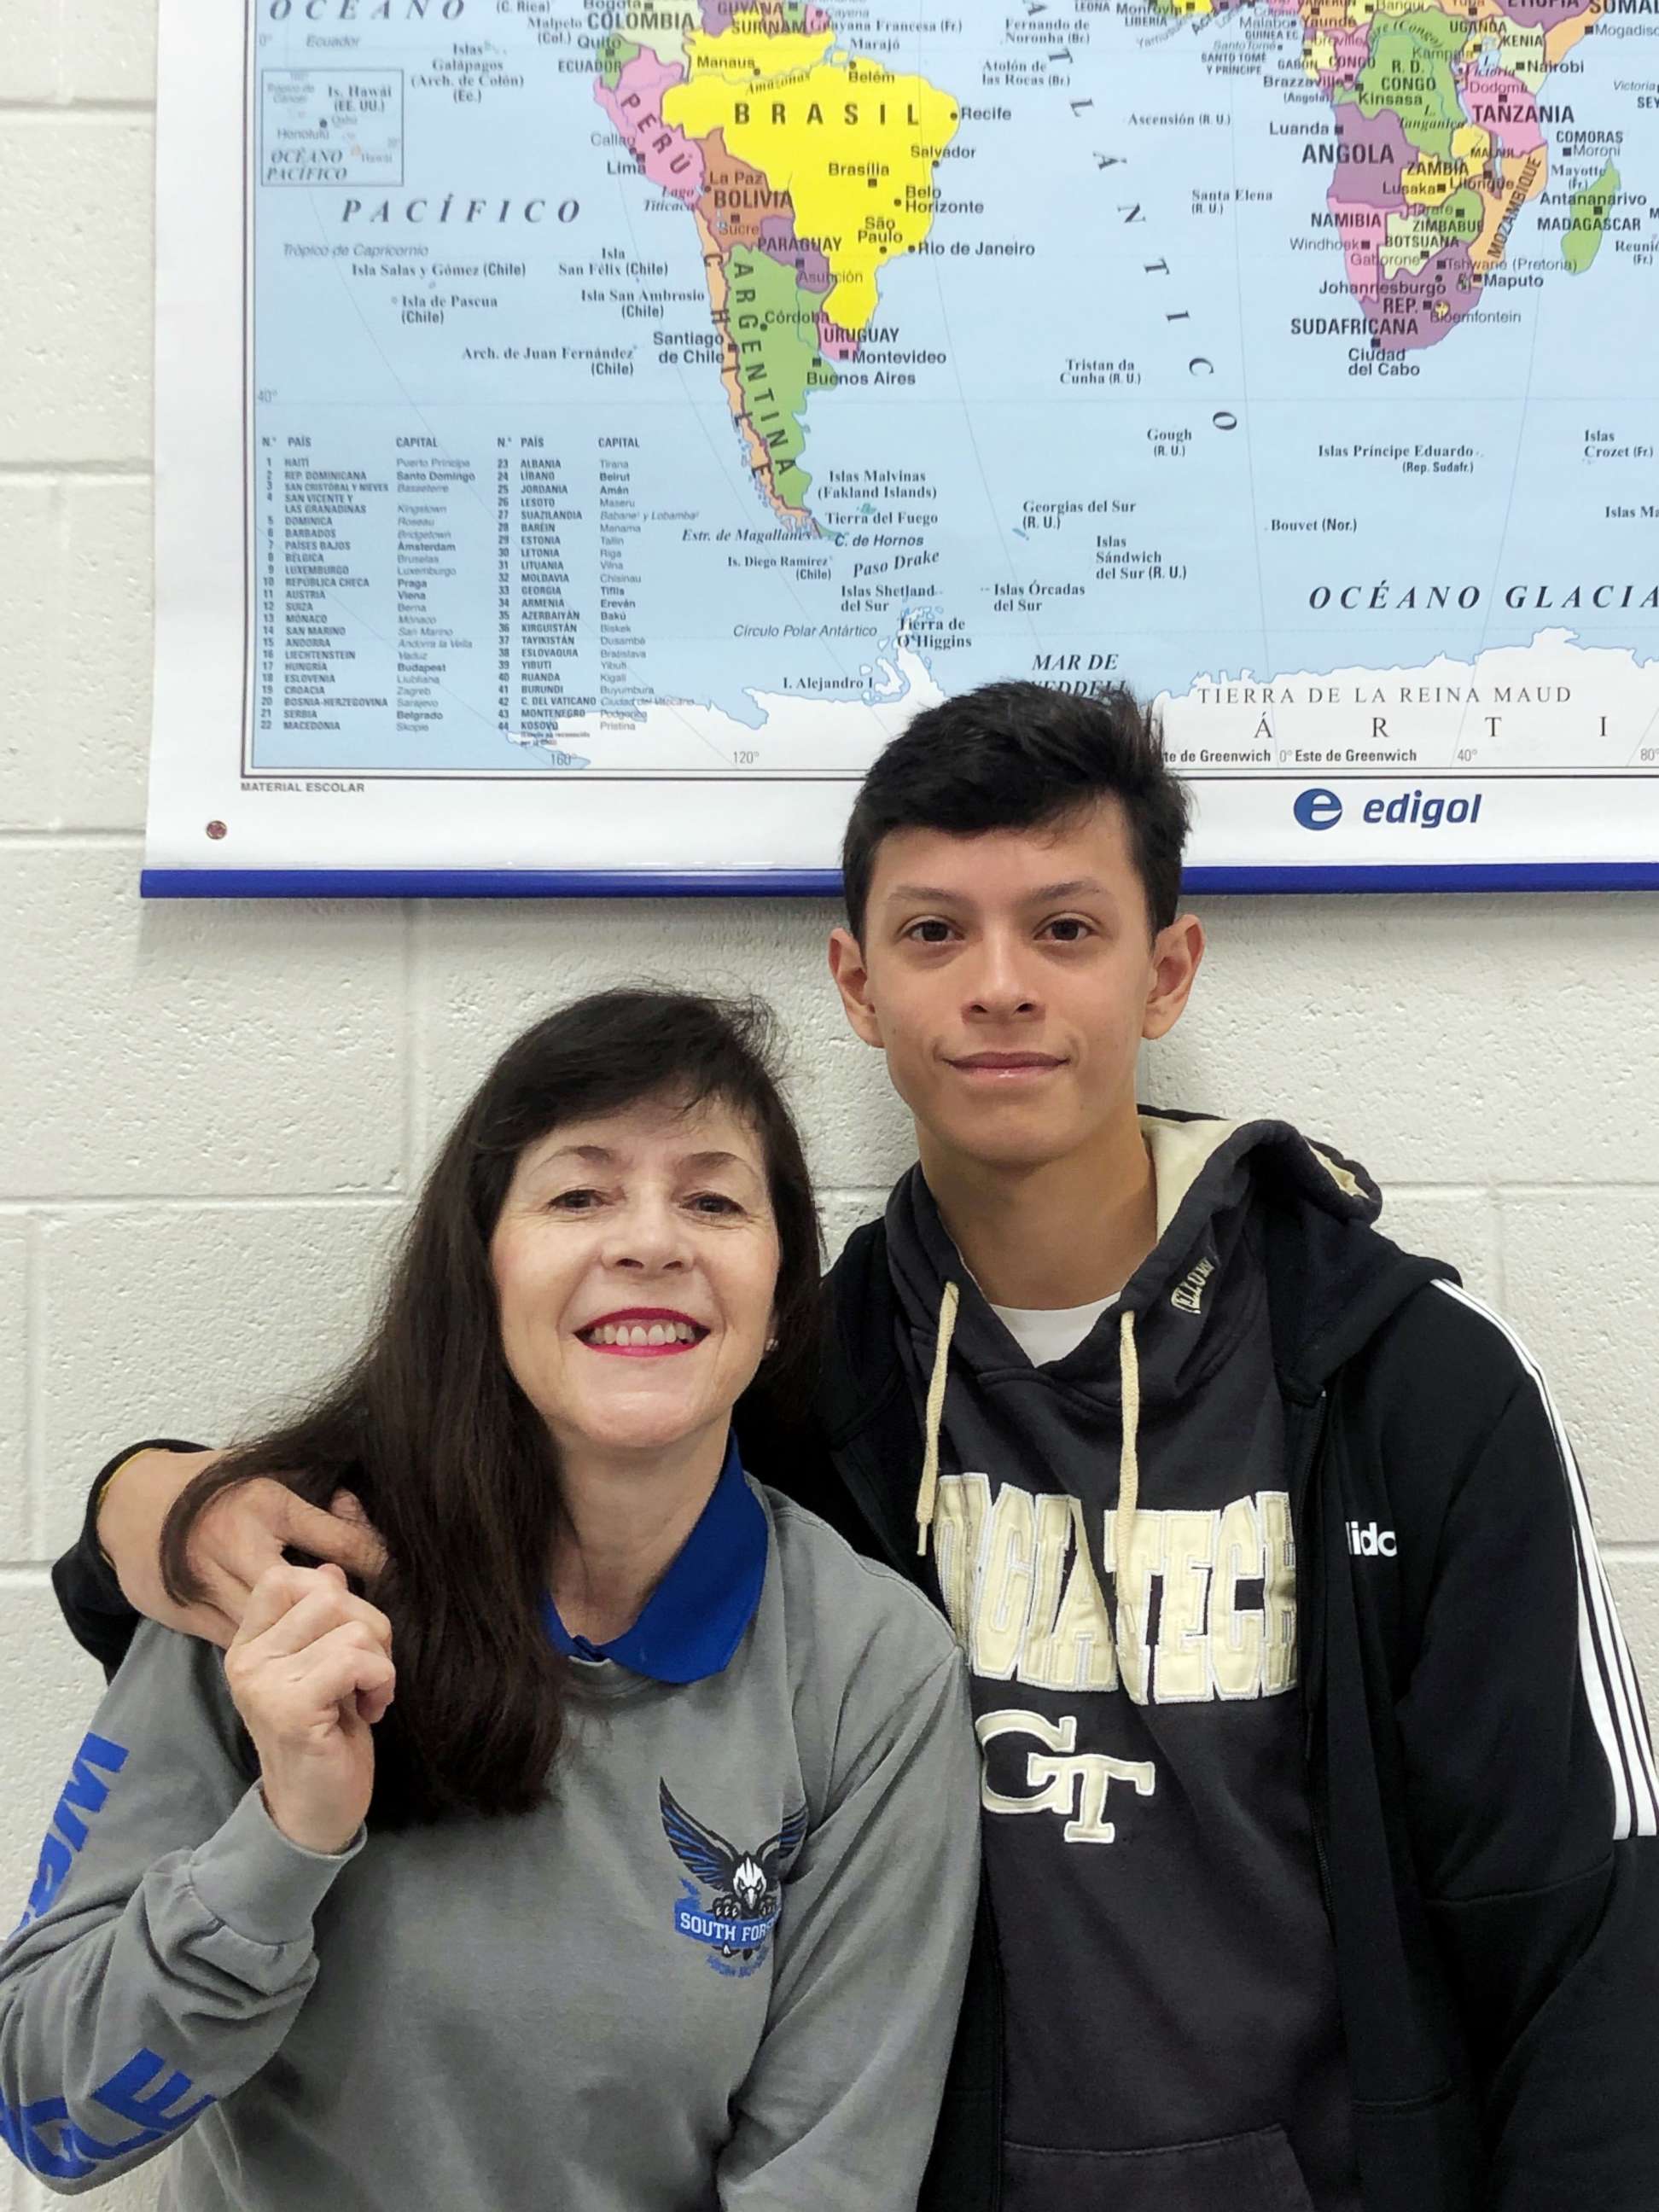 PHOTO: High school senior, Max Pacheco, poses for a photo with his favorite teacher, Dr. Gloria Green, in an undated handout photo.